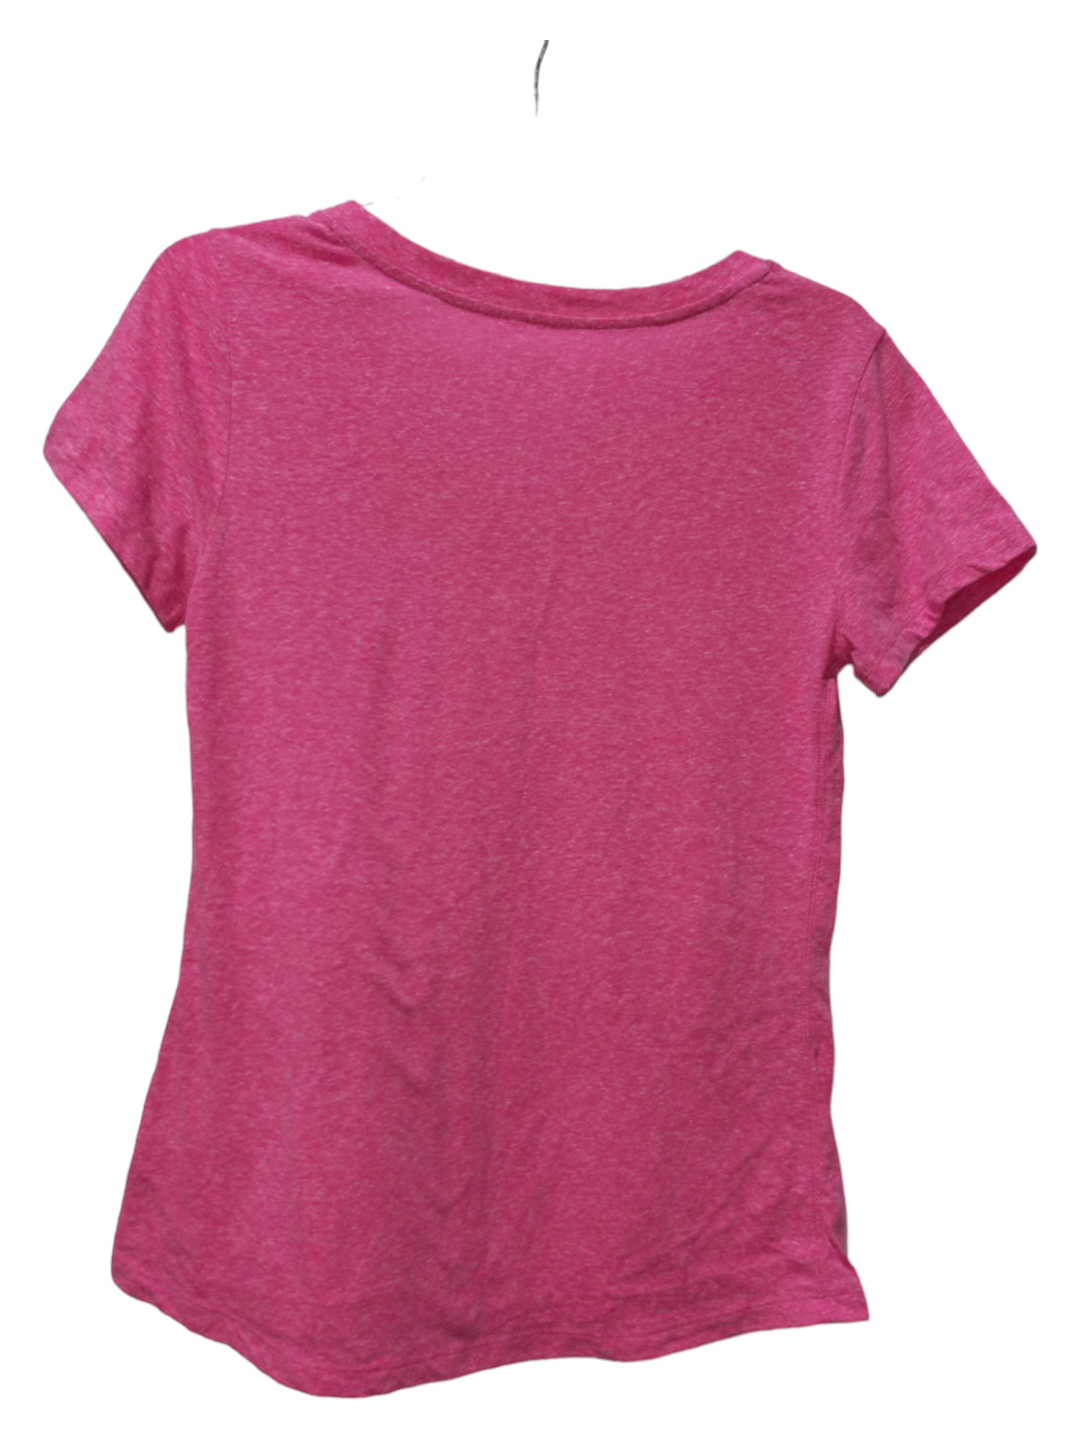 Pink Athletic Top Short Sleeve Bcg, Size M